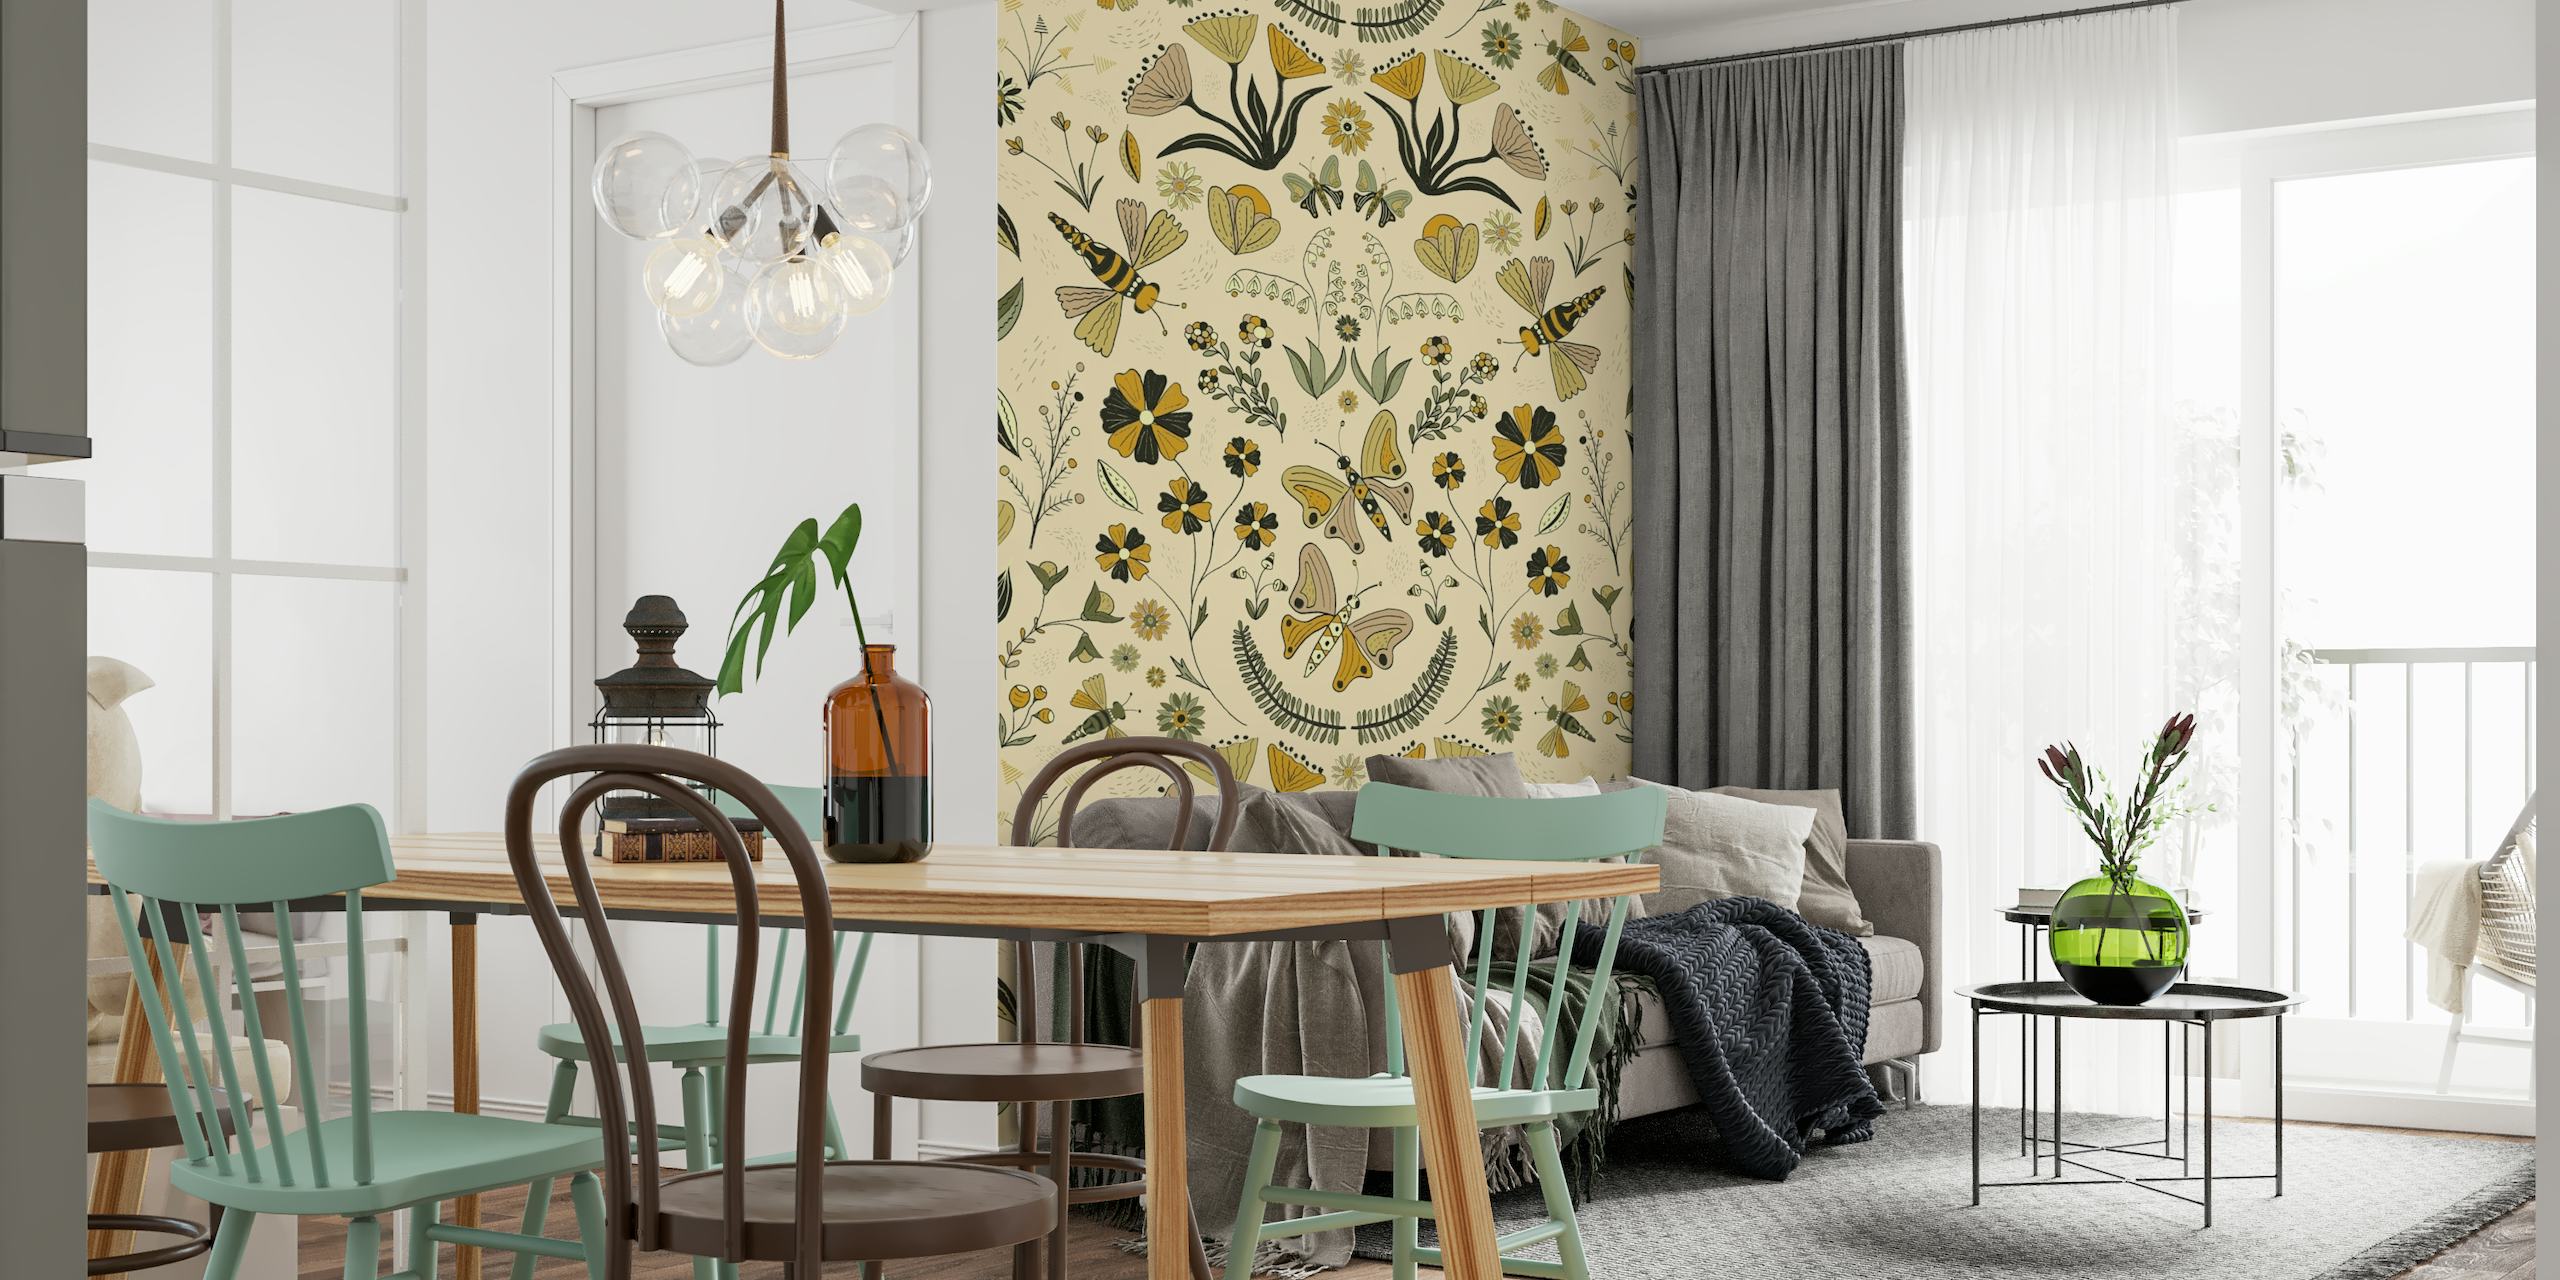 Illustrative wall mural featuring a symmetrical pattern of plants, butterflies, and abstract animals in a garden setting